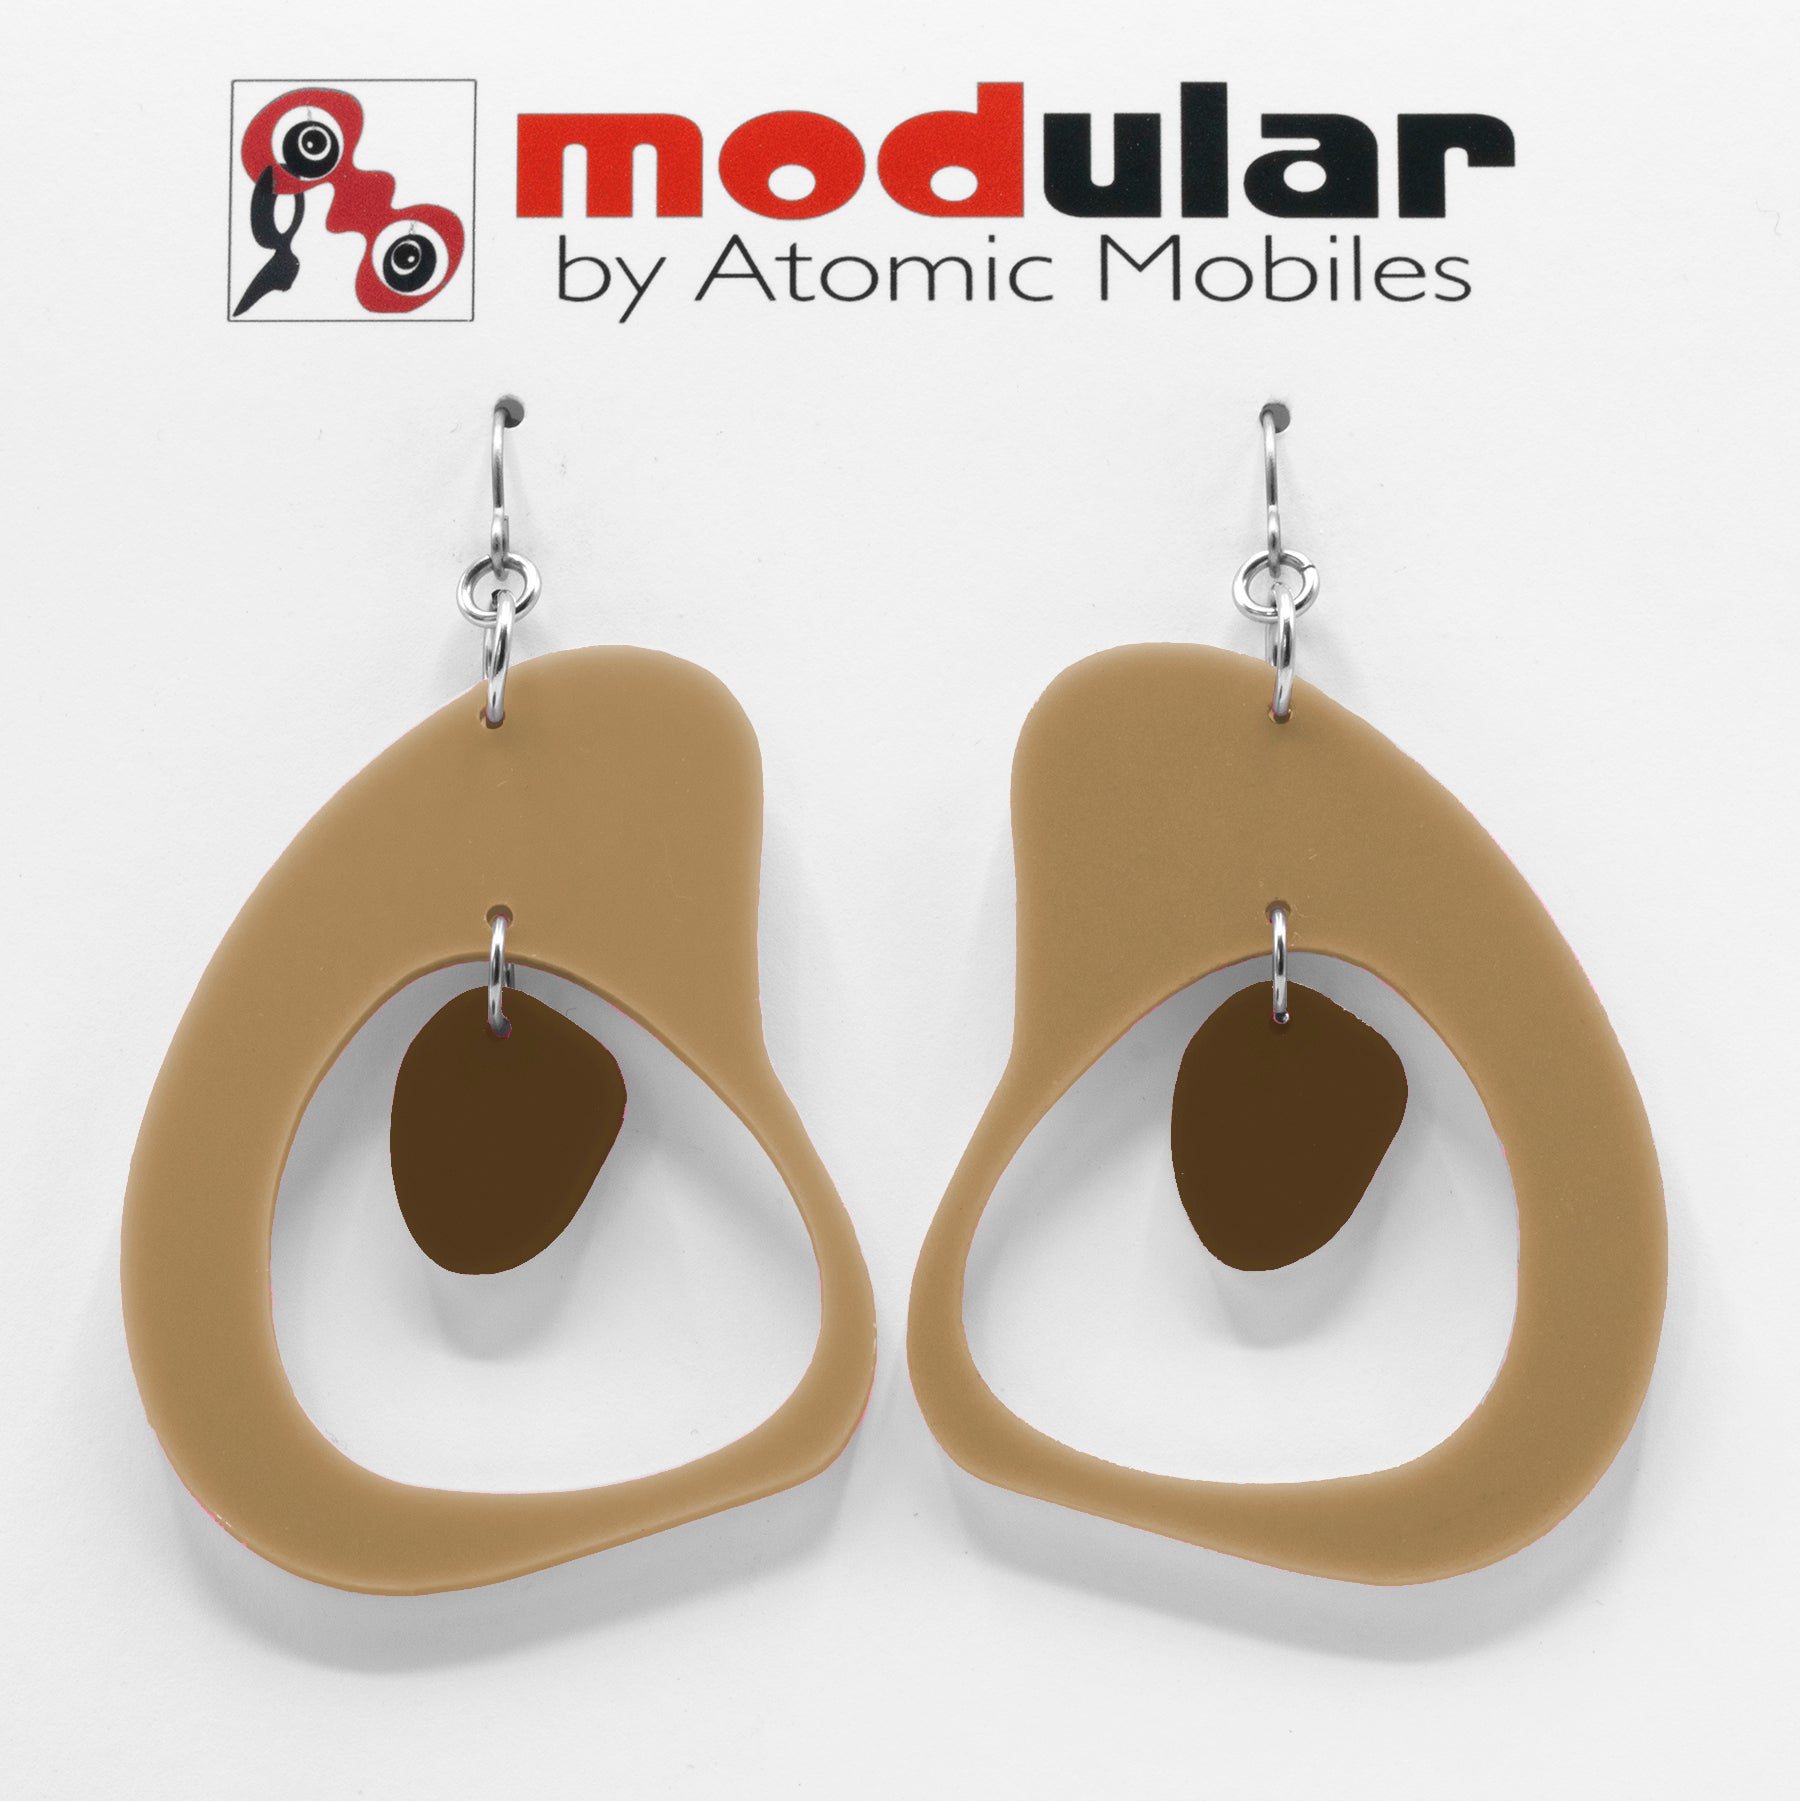 MODular Earrings - Boomerang Statement Earrings in Beige Tan and Brown by AtomicMobiles.com - retro era inspired mod handmade jewelry